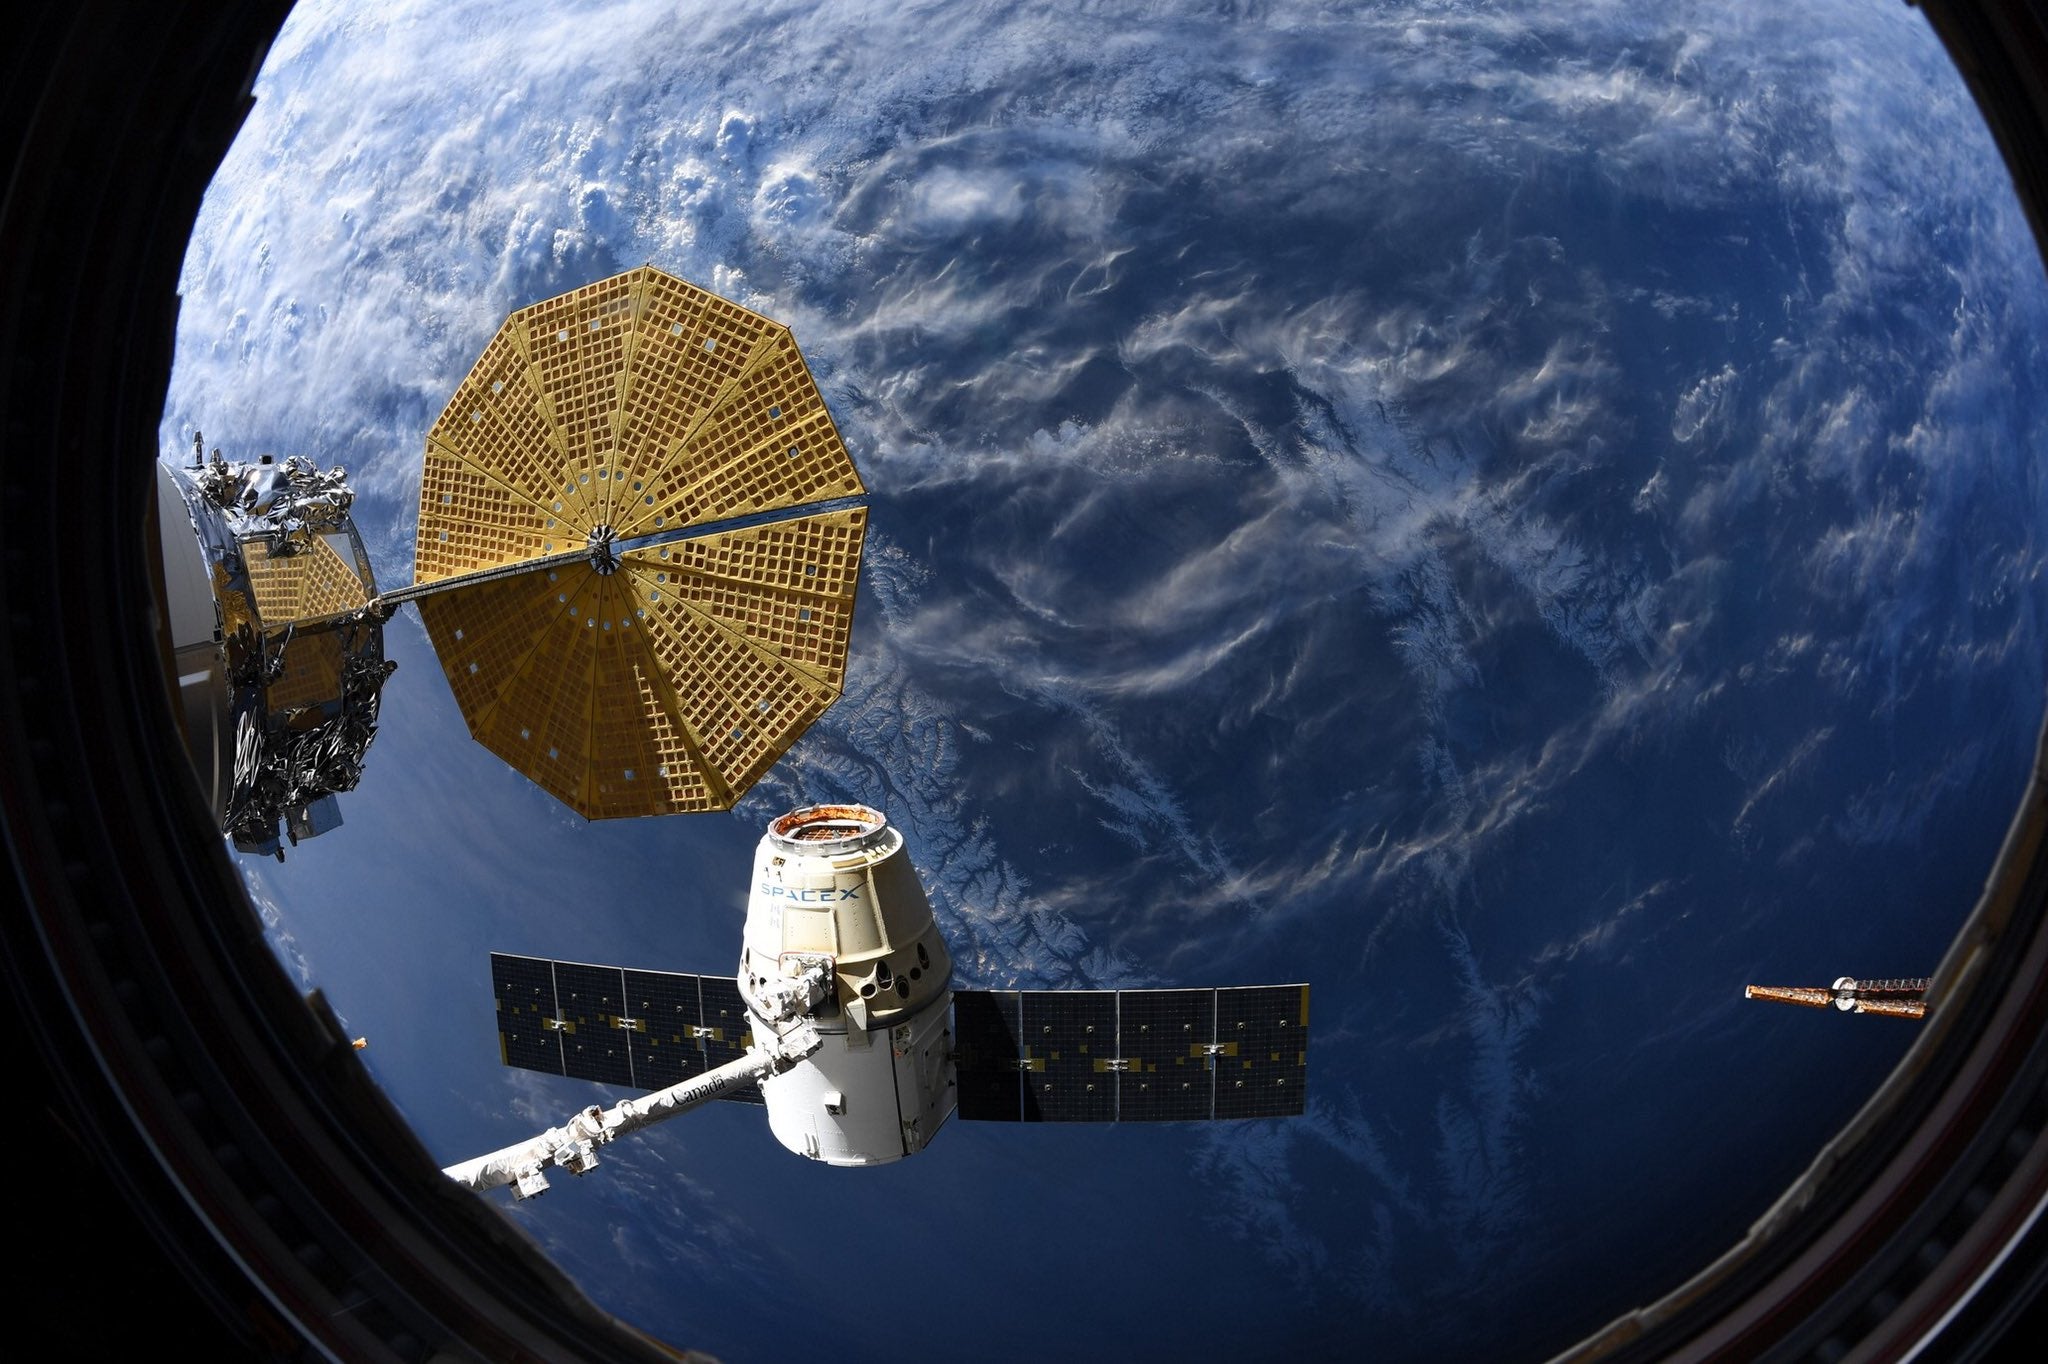 SpaceX's original Dragon spacecraft concludes its final mission to the Space Station